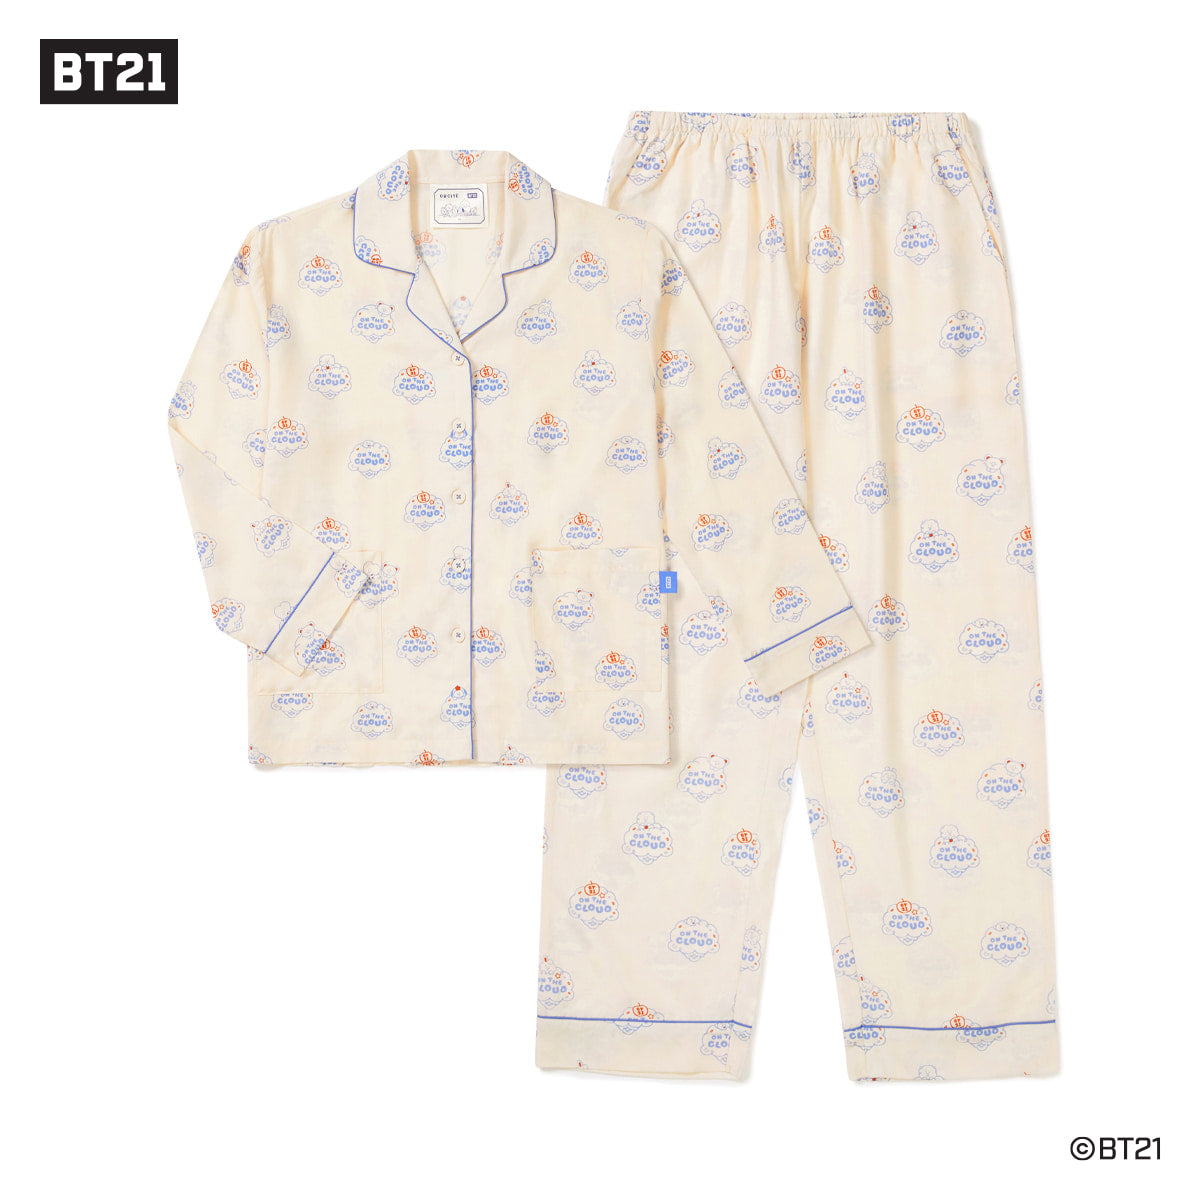 BT21 Ice Cream Long Sleeve Top and Bottom for women